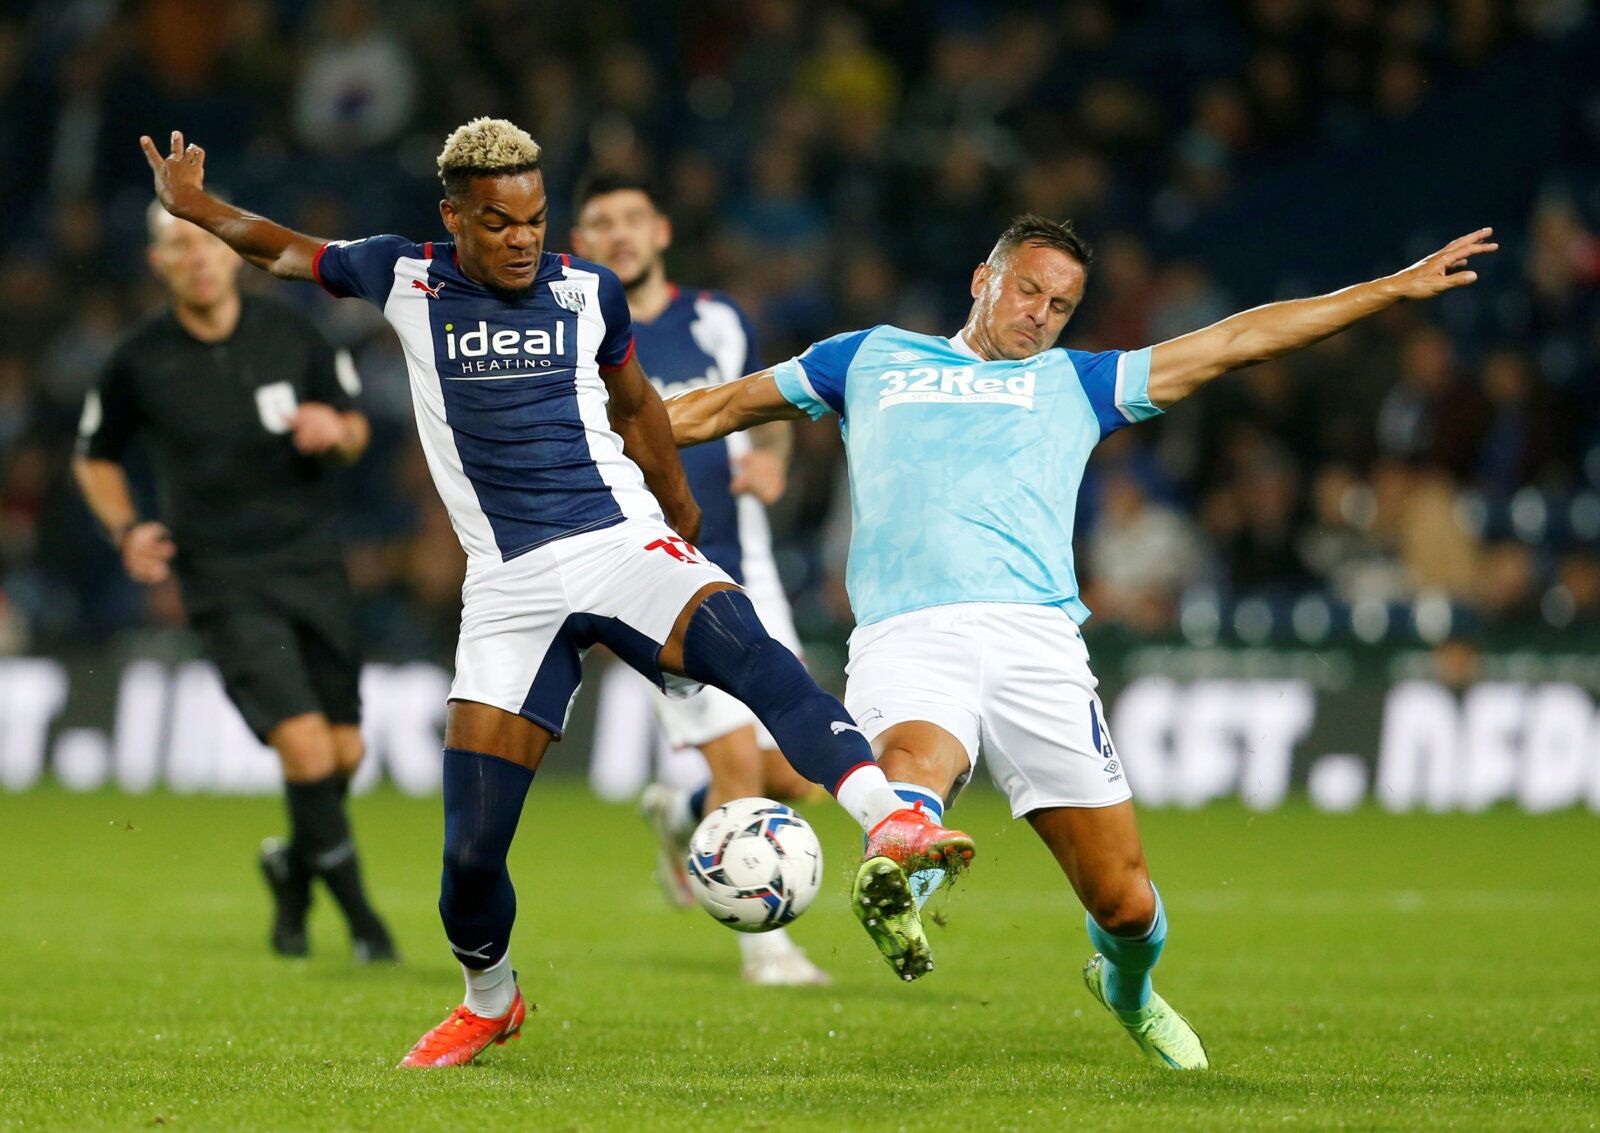 Soccer Football - Championship - West Bromwich Albion v Derby County - The Hawthorns, West Bromwich, Britain - September 14, 2021 West Bromwich Albion's Grady Diangana in action with Derby County's Phil Jagielka  Action Images/Ed Sykes